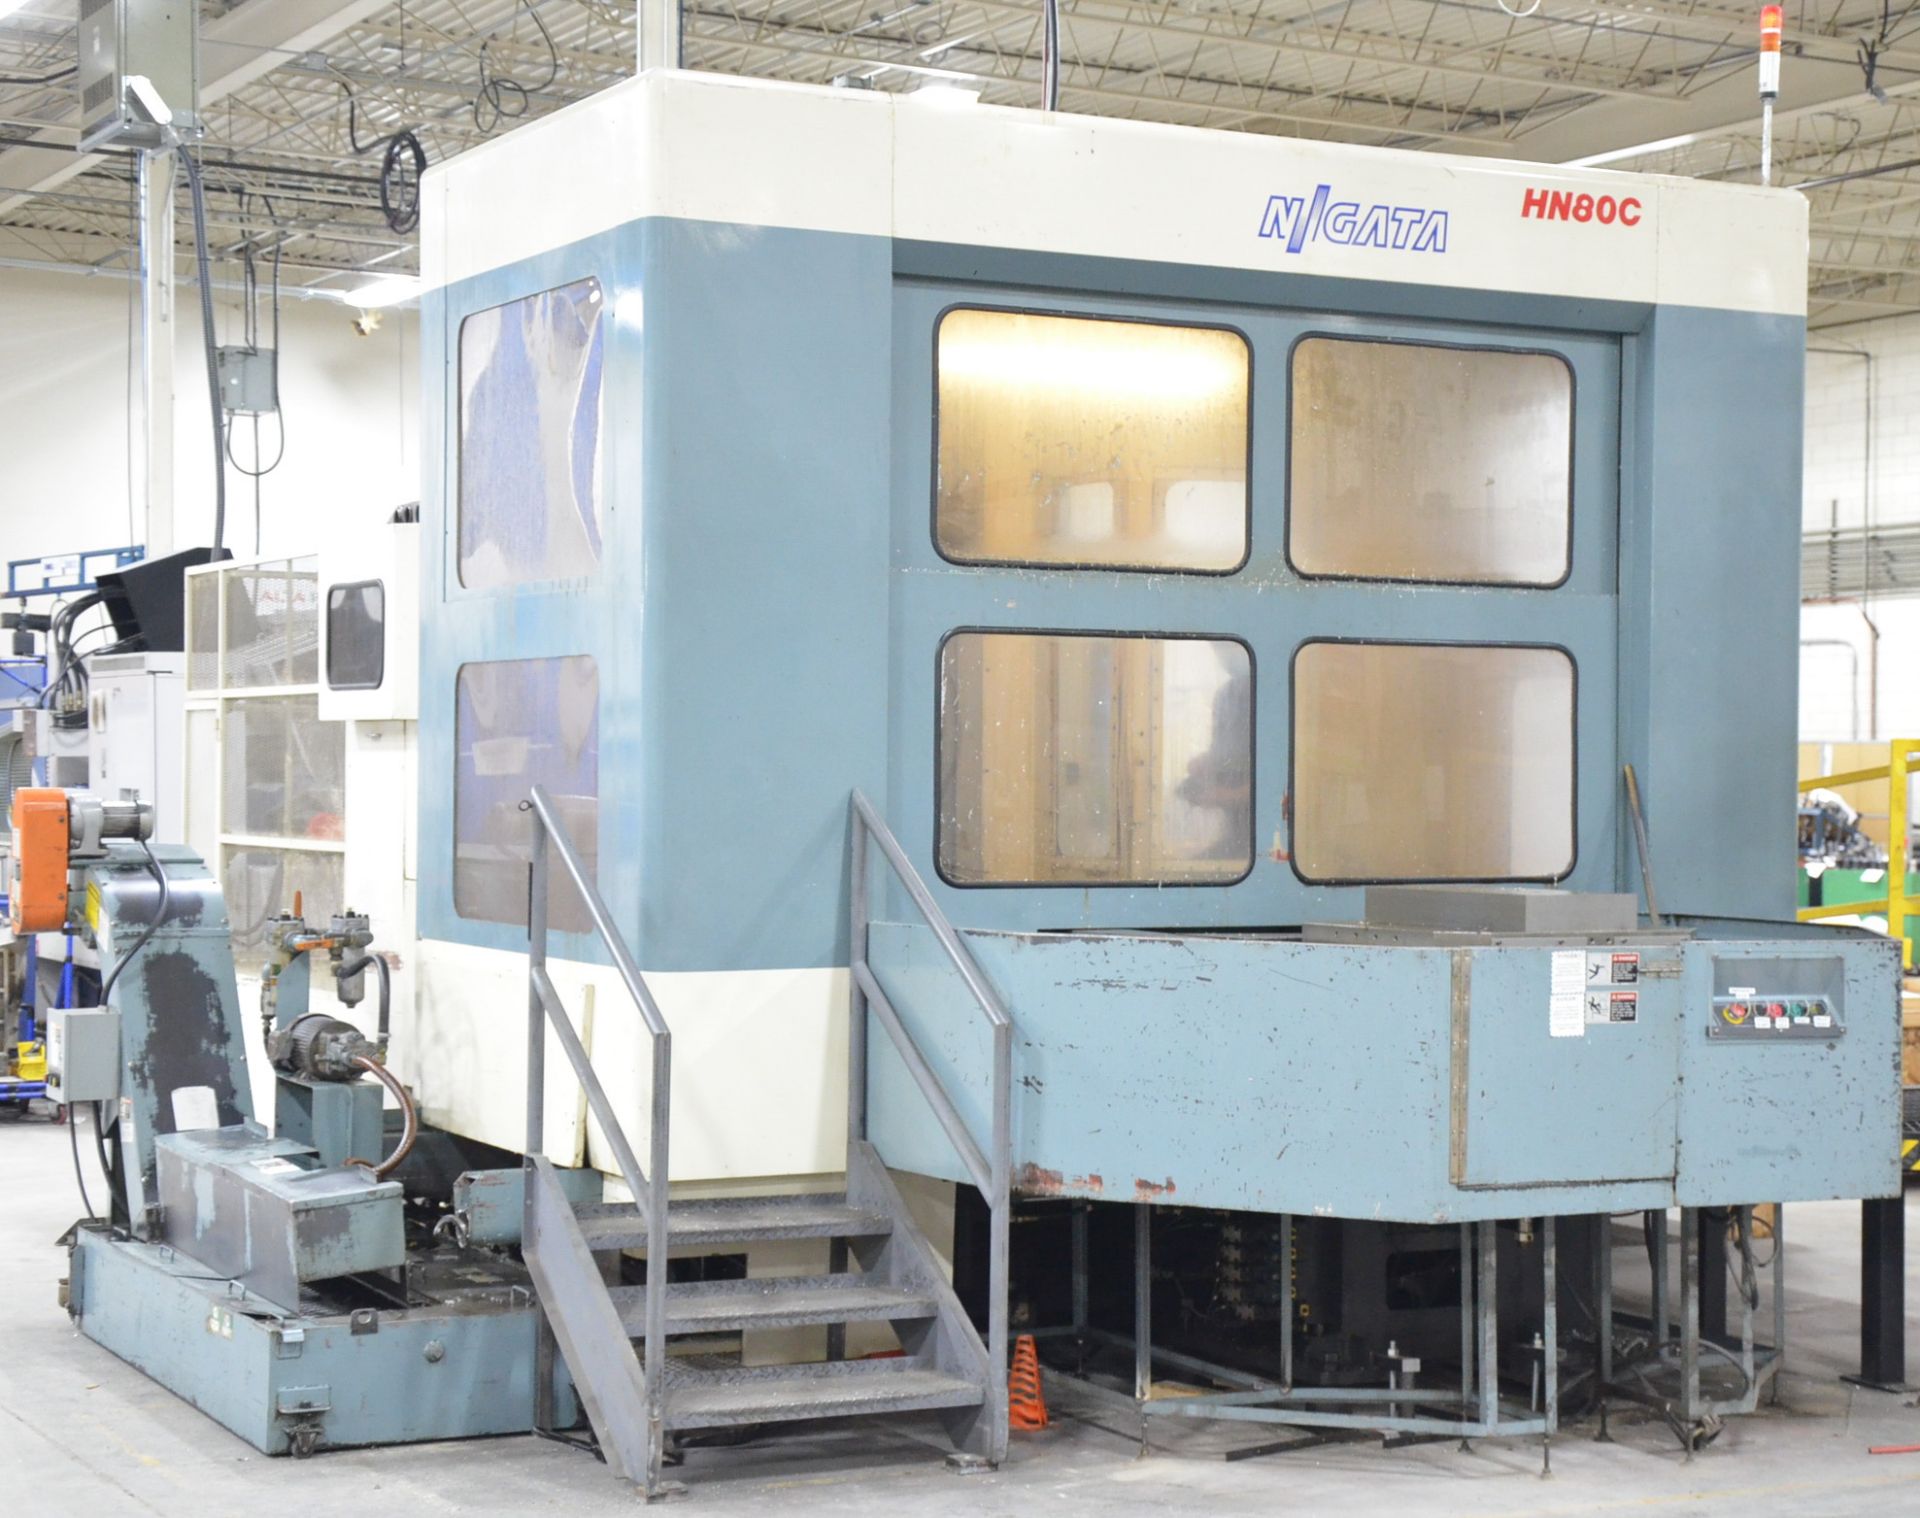 NIIGATA HN80C 4-AXIS CNC TWIN PALLET HORIZONTAL MACHINING CENTER WITH FANUC 15-M CNC CONTROL, (2) - Image 6 of 14